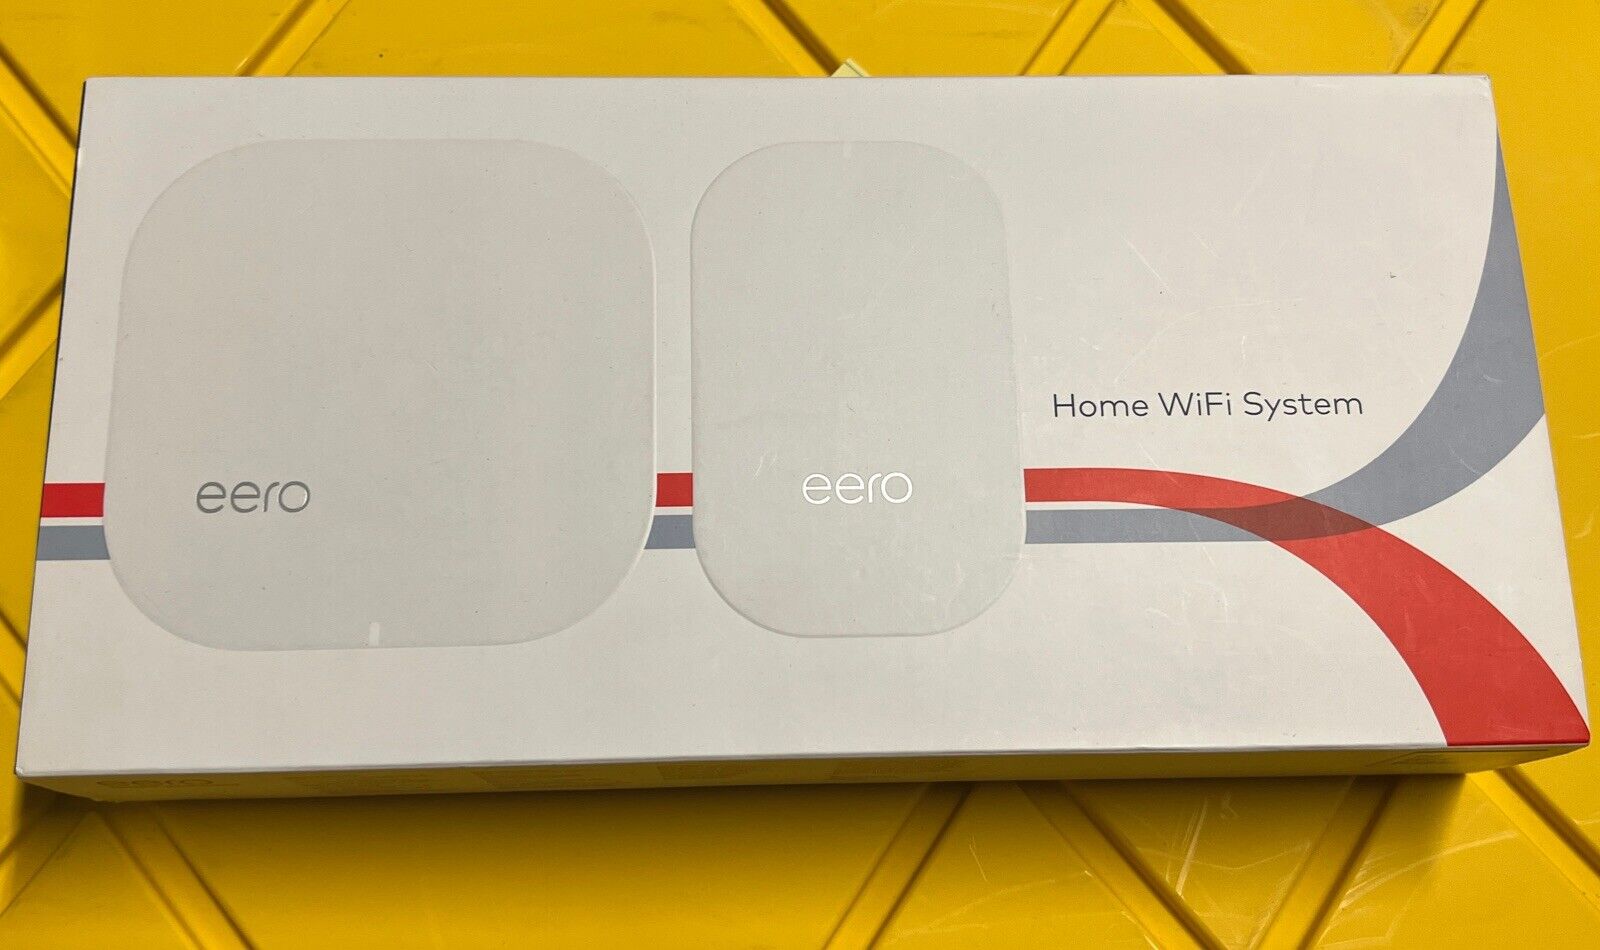 eero Home WiFi System Extender 2nd Gen 1 eero And 1 Beacon Router M010201 Sealed